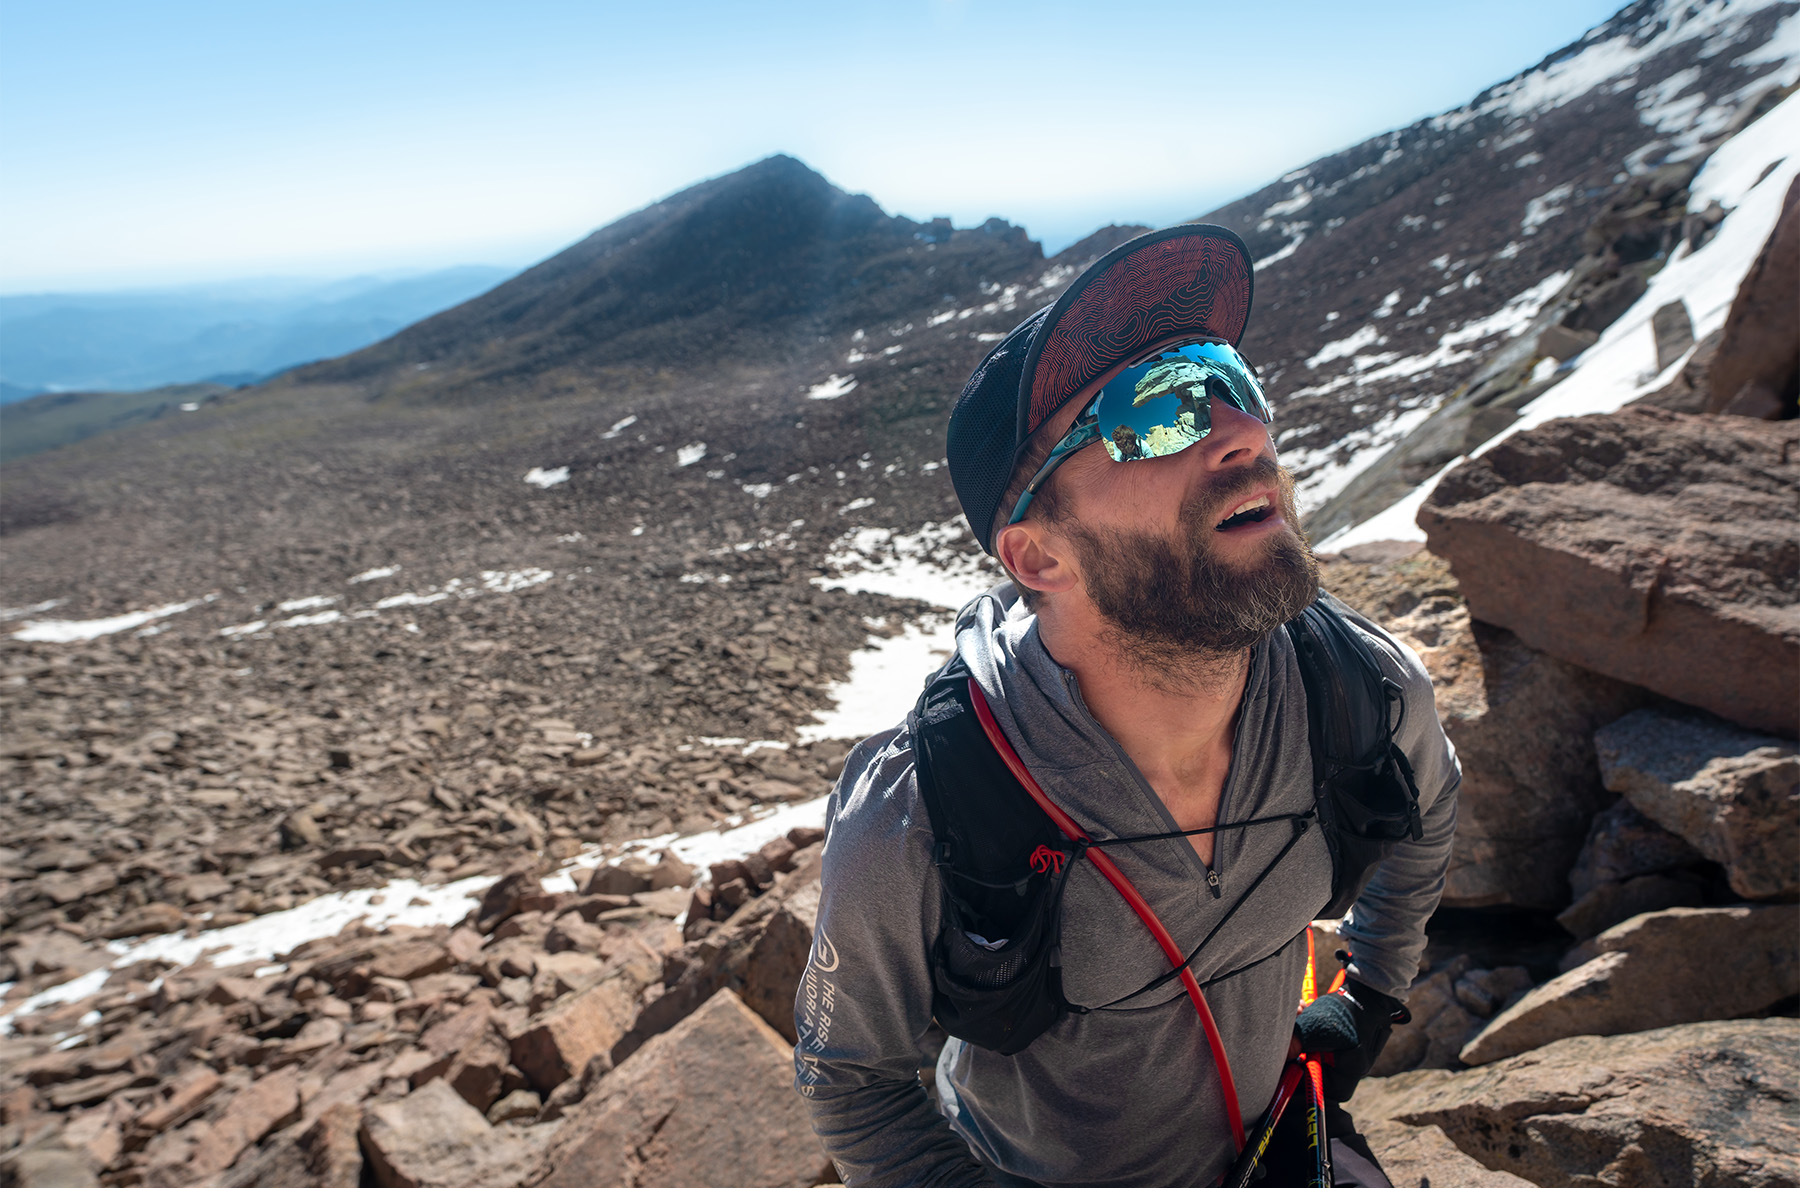 The “Rocky Mountain Grand Slam”: it involves summiting 122 peaks and 318,000 feet of elevation gain (the equivalent of summiting Everest 11 times from sea level). And Vuori & Athletic Brewing athlete, Jason Hardrath, recently set a new FKT by completing it in under 40 days. So on our latest Off The Couch podcast Jonathan Ellsworth catches up with Jason to break down his most recent accomplishment, and to discuss the blurring of the lines between running, scrambling, and soloing.